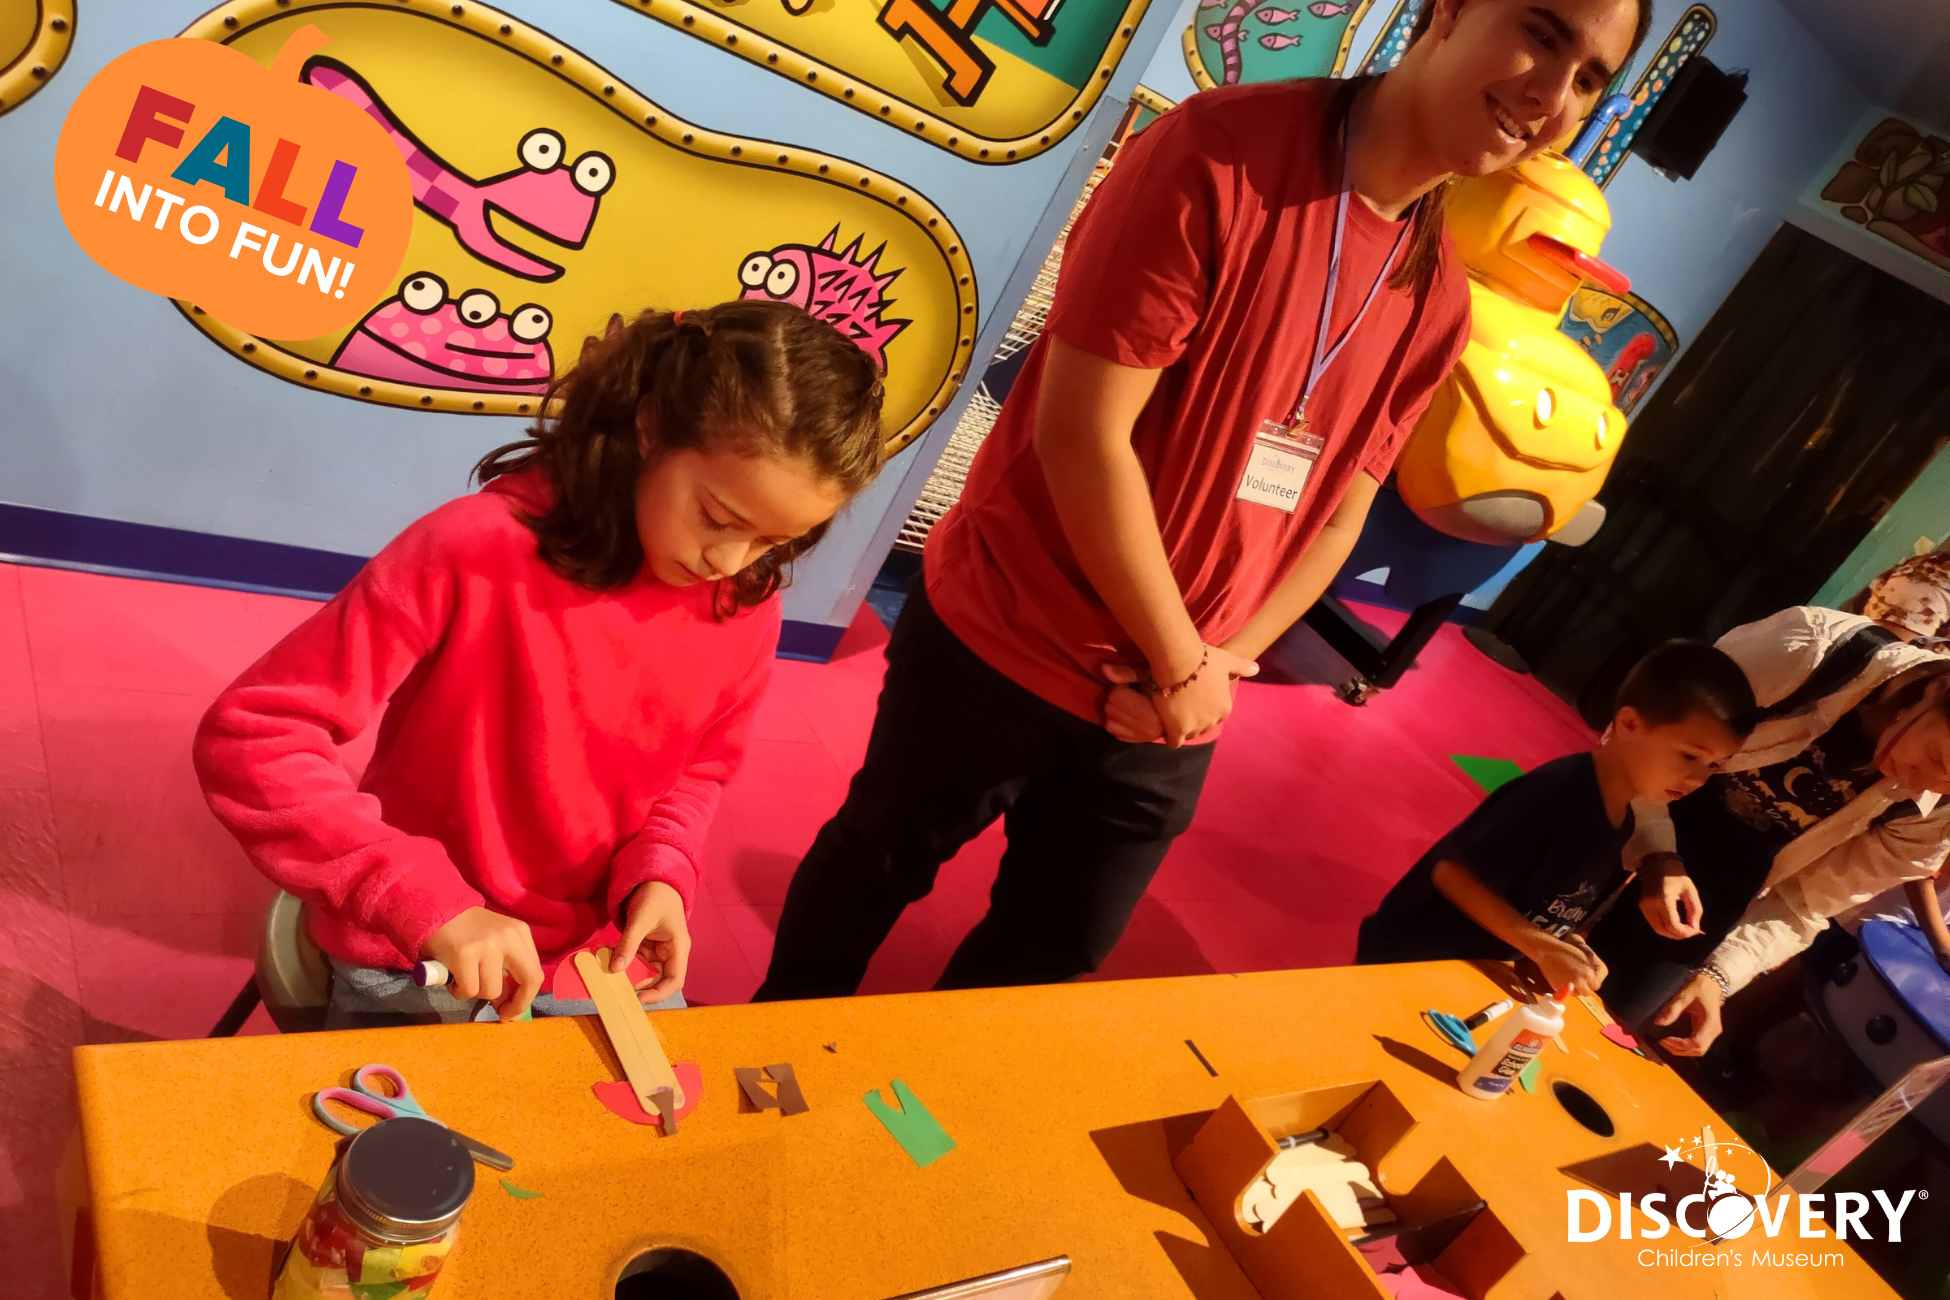 a museum volunteer stands next to a young girl making crafts with paper and a glue stick at the Discovery Children's Museum